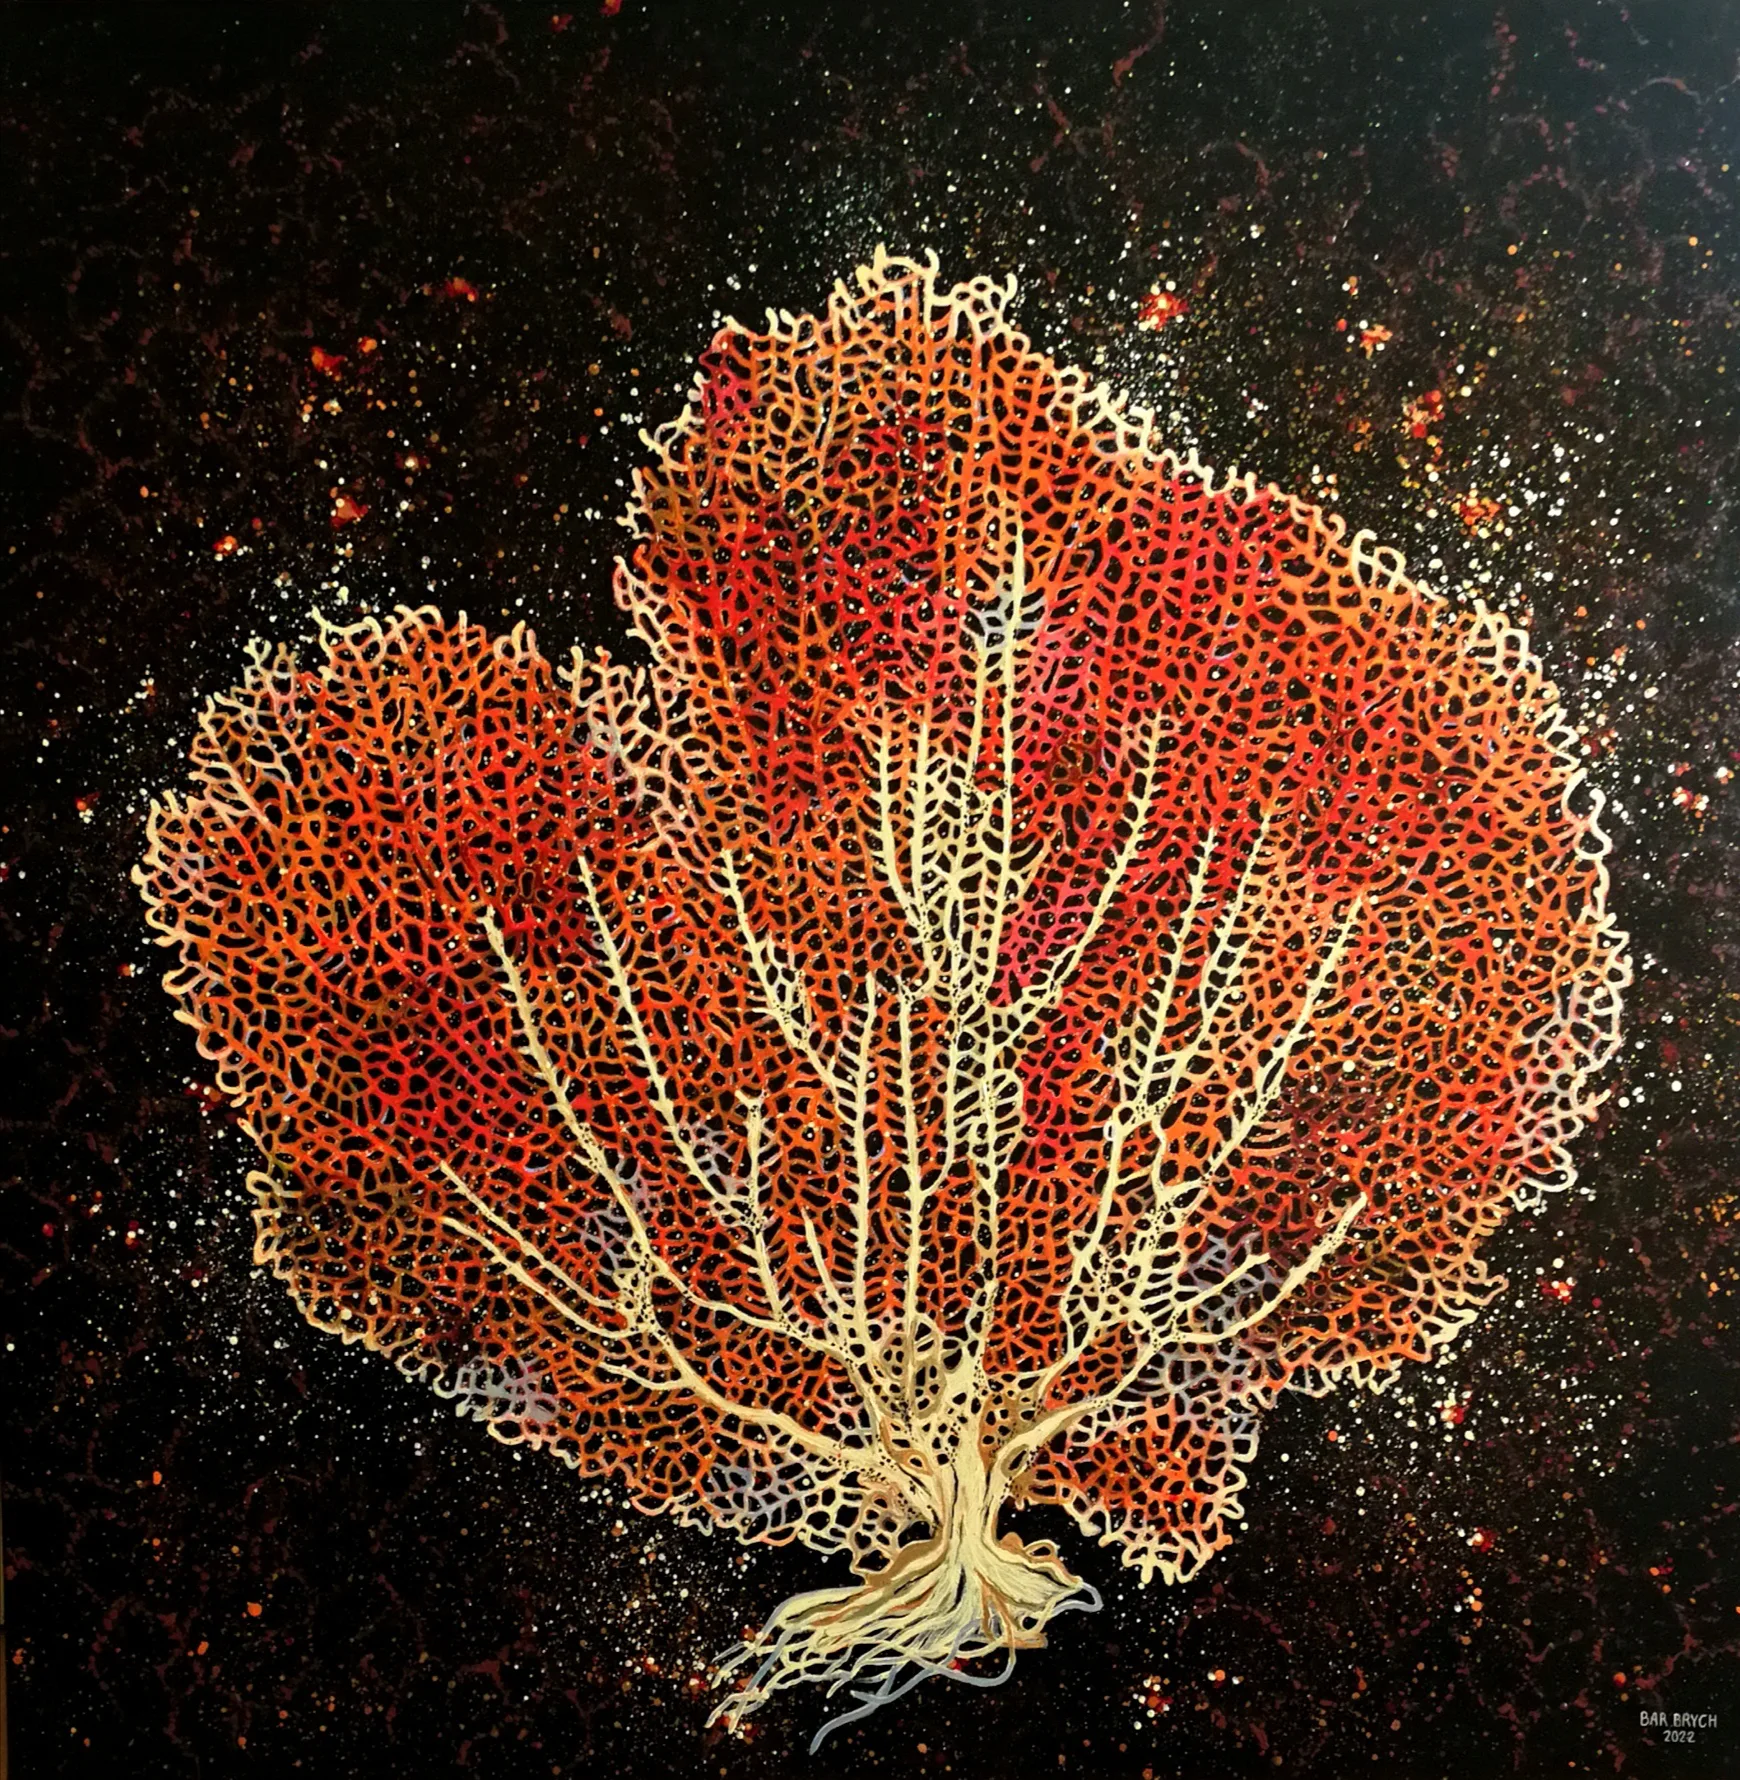 The painting called Black Lagoon, depicting a coral reef, measuring 100x100 cm, made in 2022 using acrylic technique